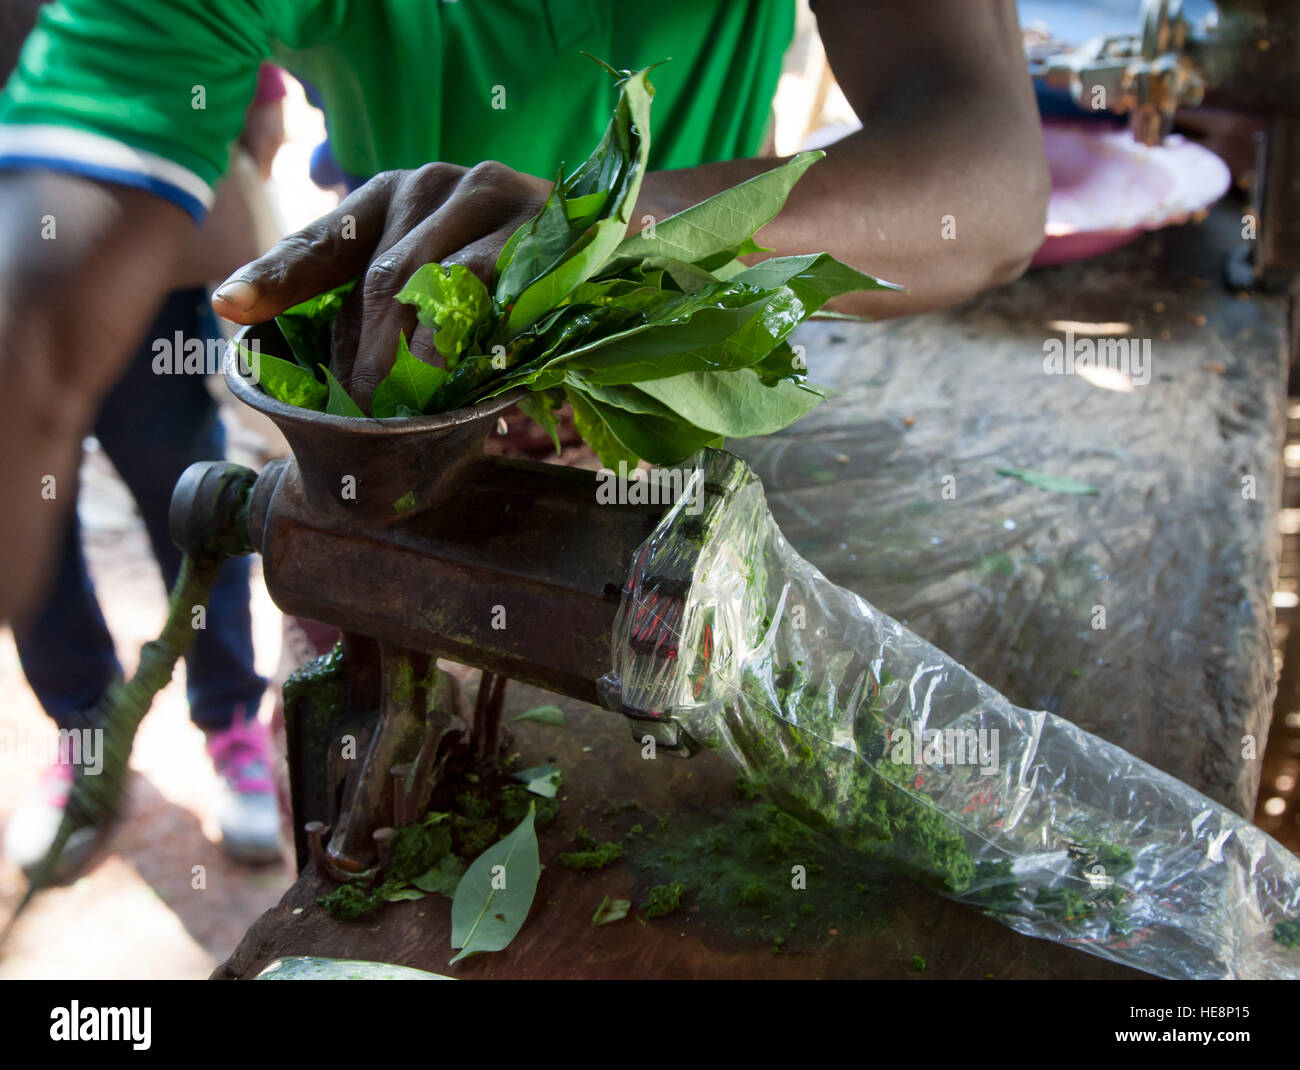 Cassava leafs beeing minced on market in Kabala, Sierra Leone. At every market in Sierra Leone, cassava leaves are freshly put through the grinder and sold in plastic bags Stock Photo